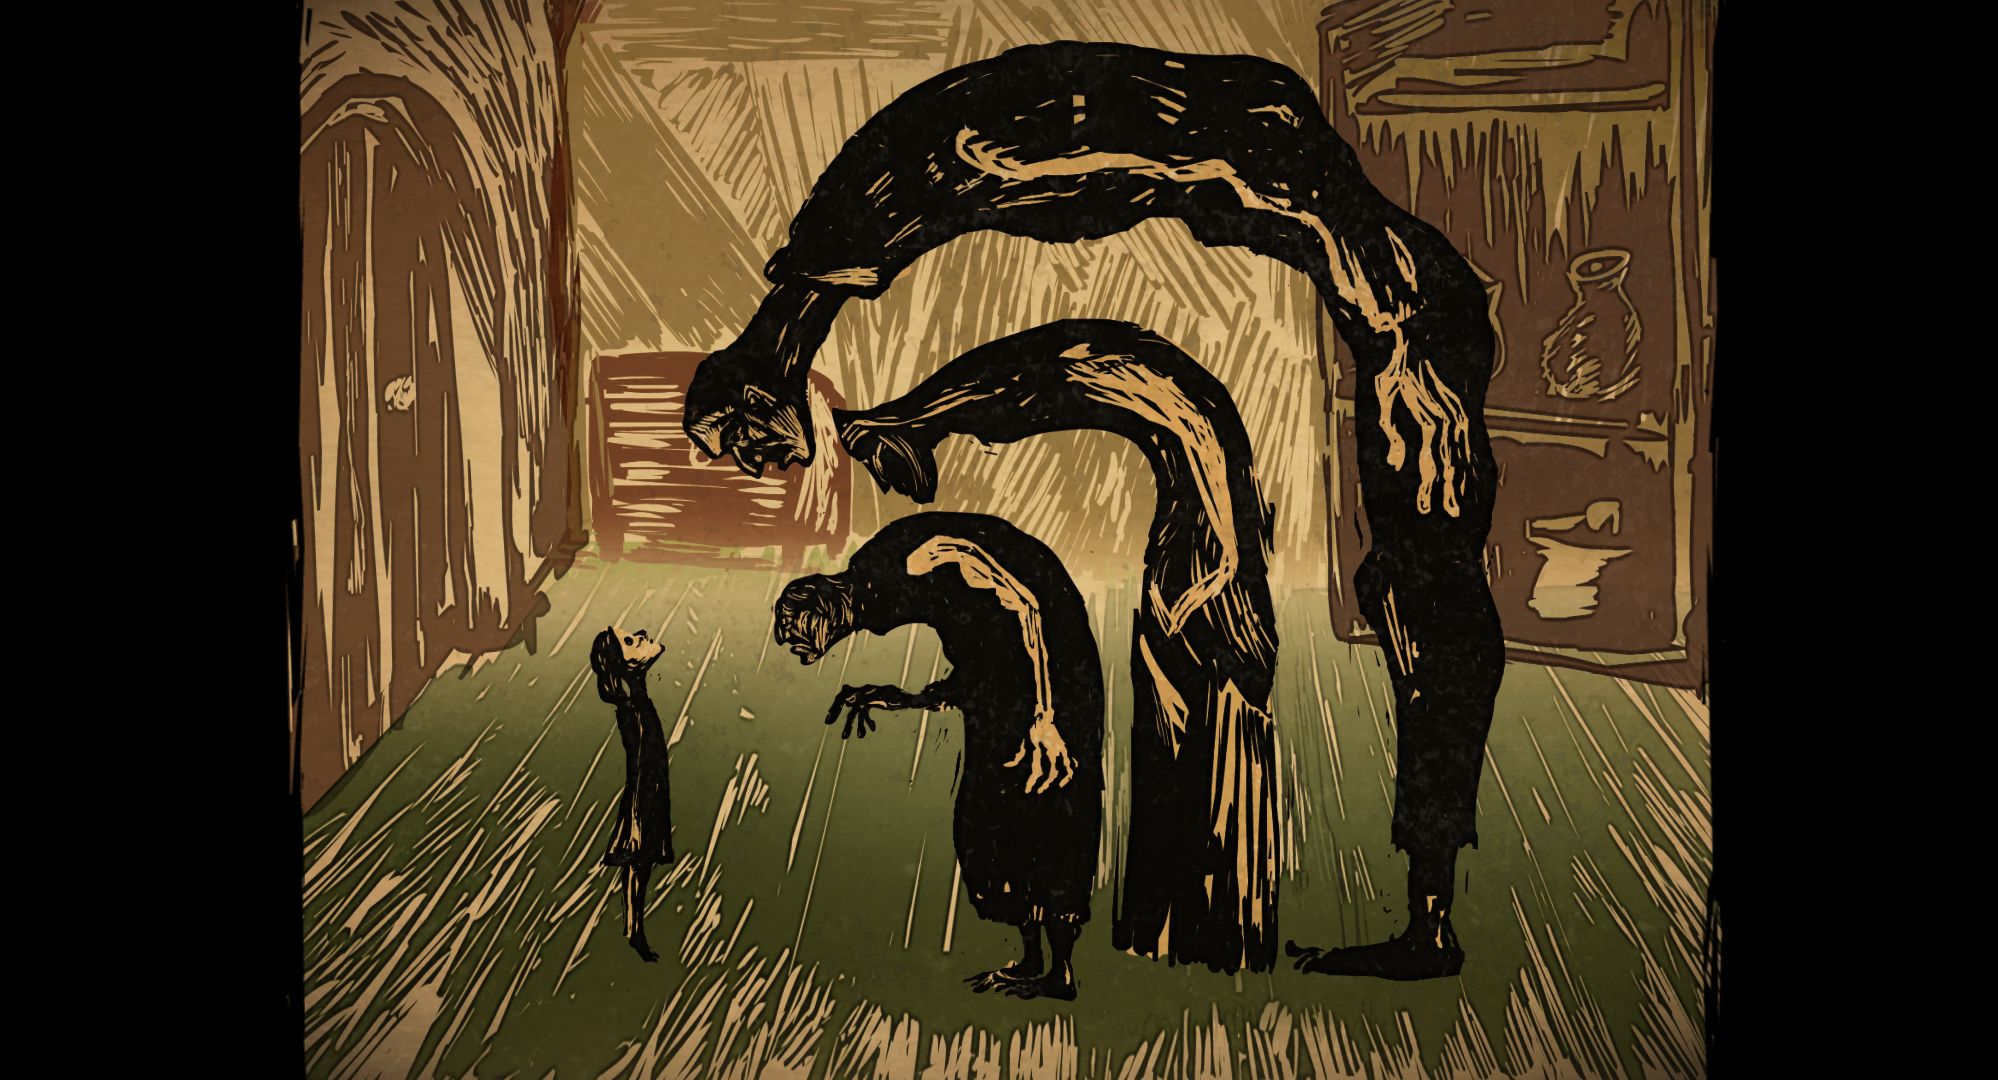 Animation in linocut style, a small young girl stands in a room looking up at three tall dark figures peering over her.